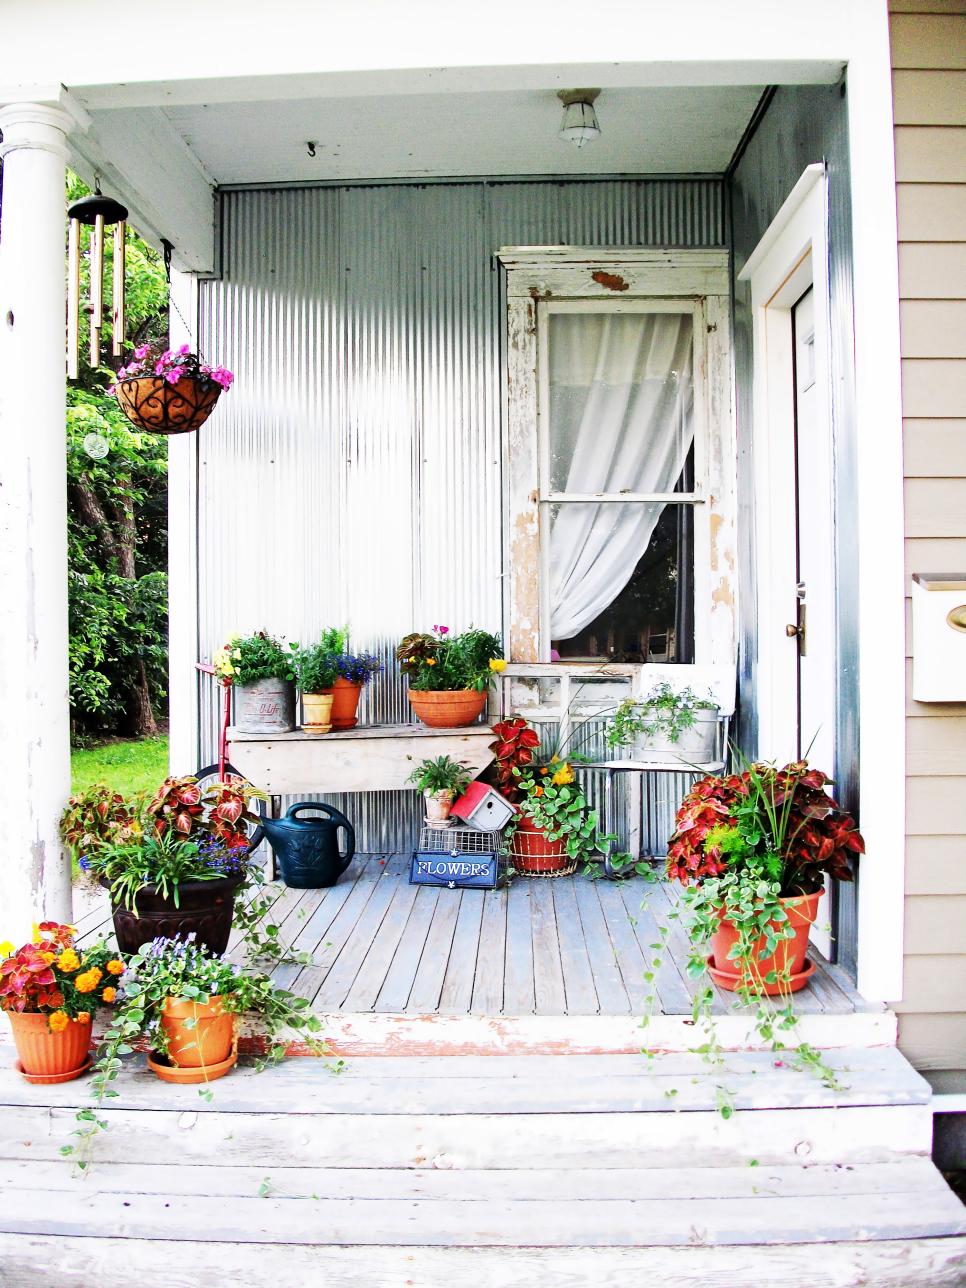 Shabby-Chic Style Exterior Design